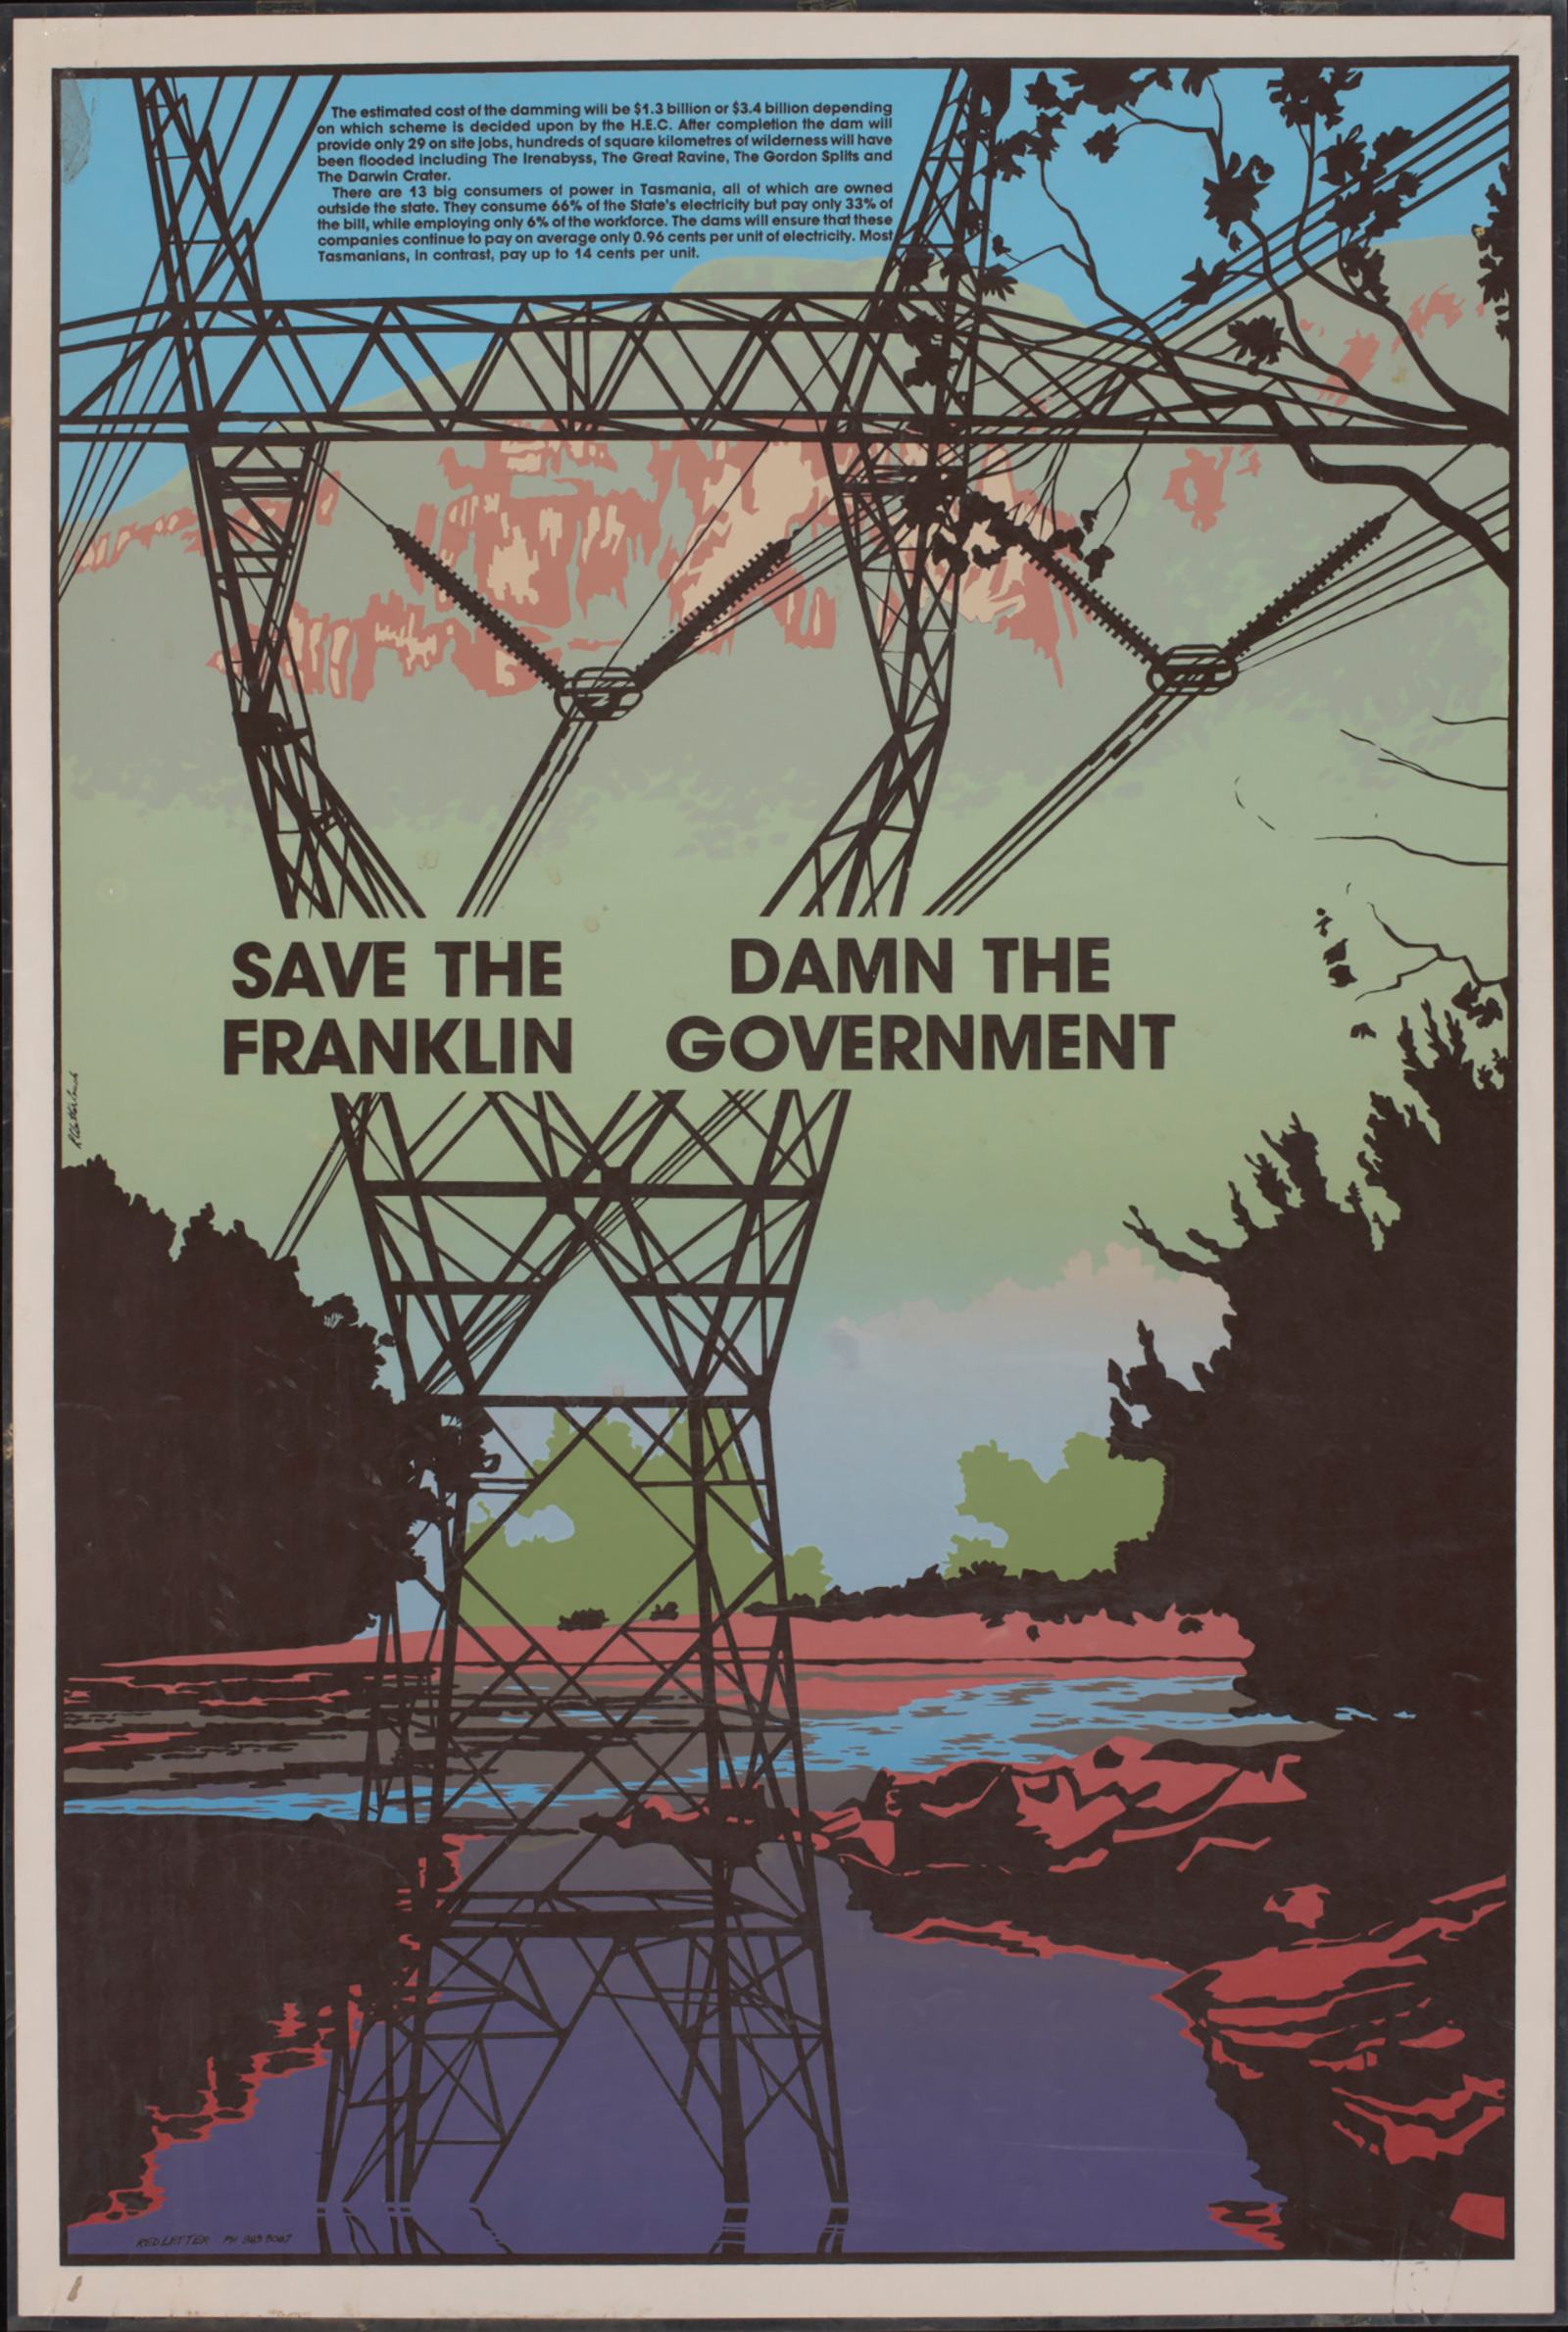 A 1982 protest poster used in the Franklin River campaign, by Bob Clutterbuck